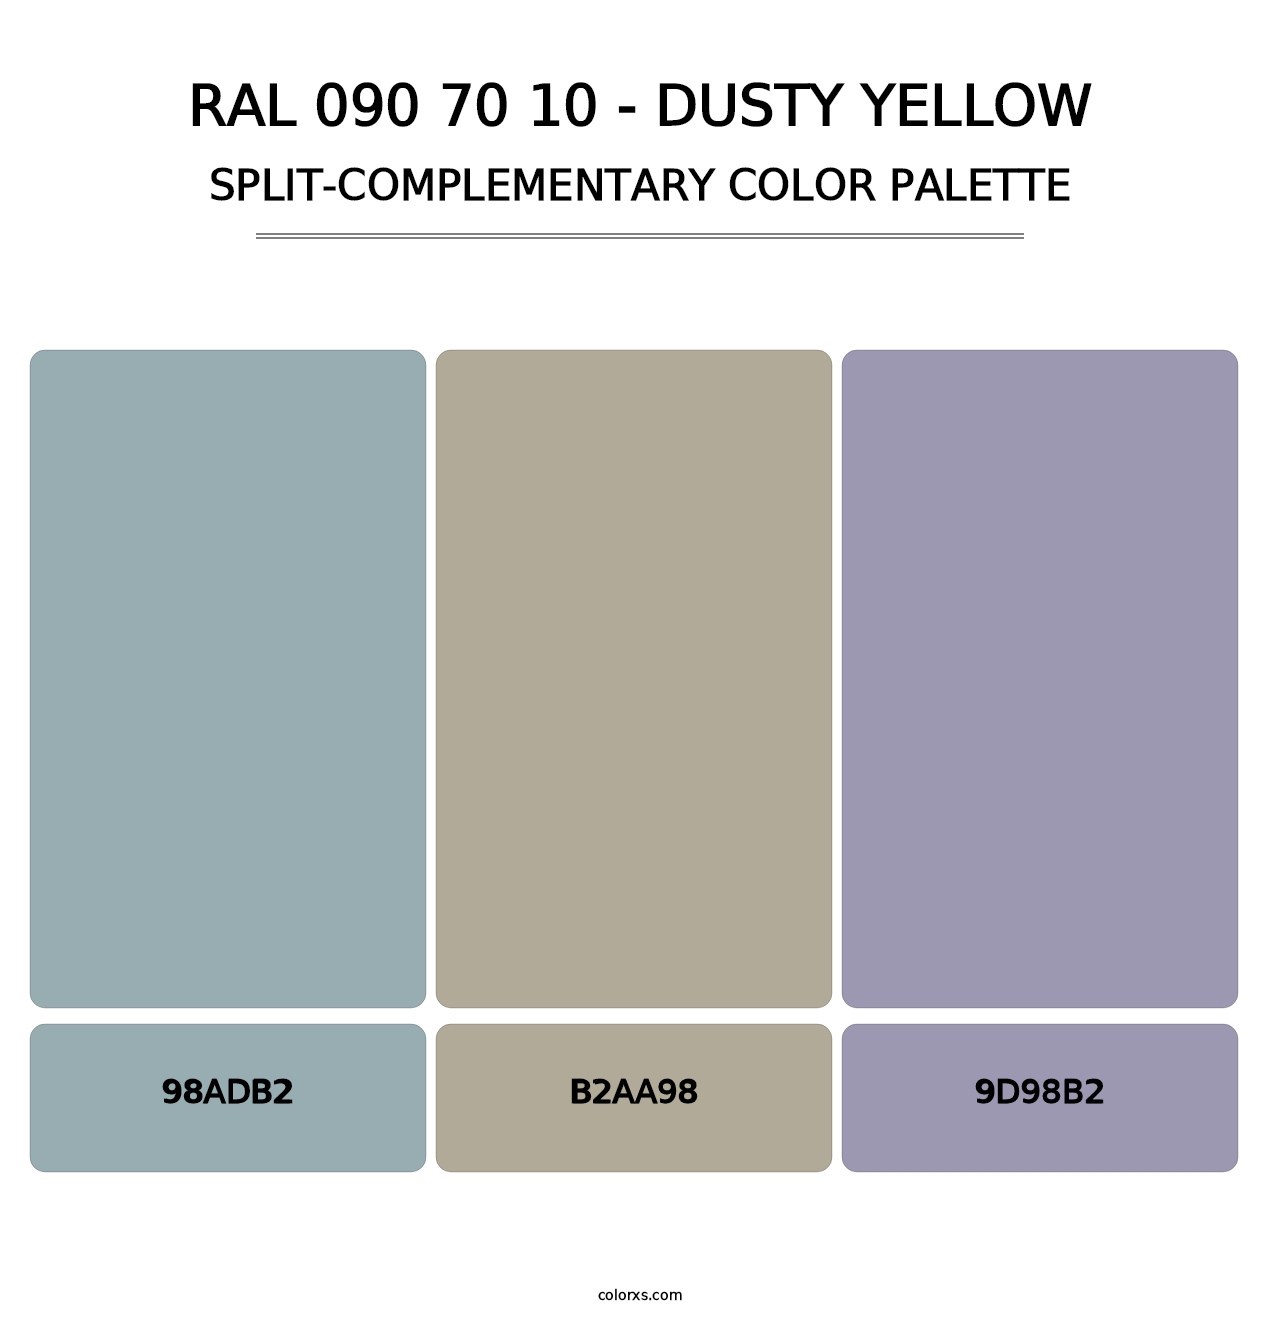 RAL 090 70 10 - Dusty Yellow - Split-Complementary Color Palette